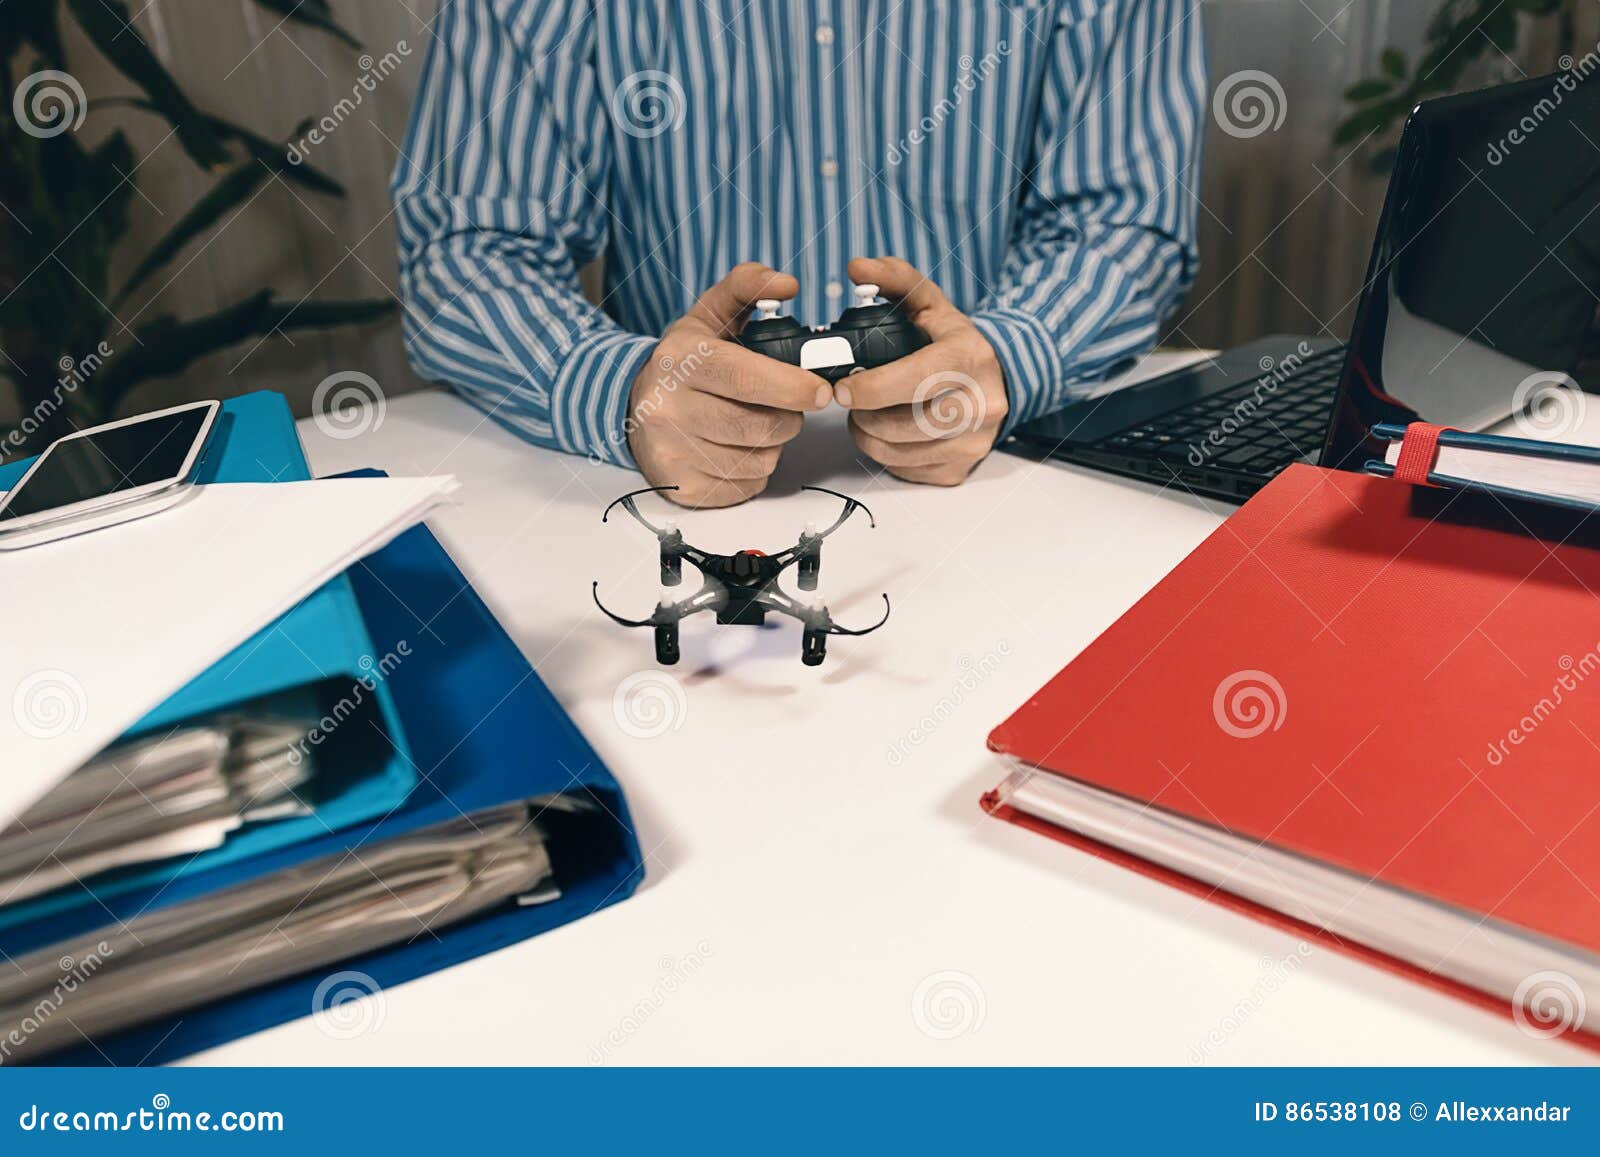 Businessman Playing With Drone Toy To Relieve Stress At Work